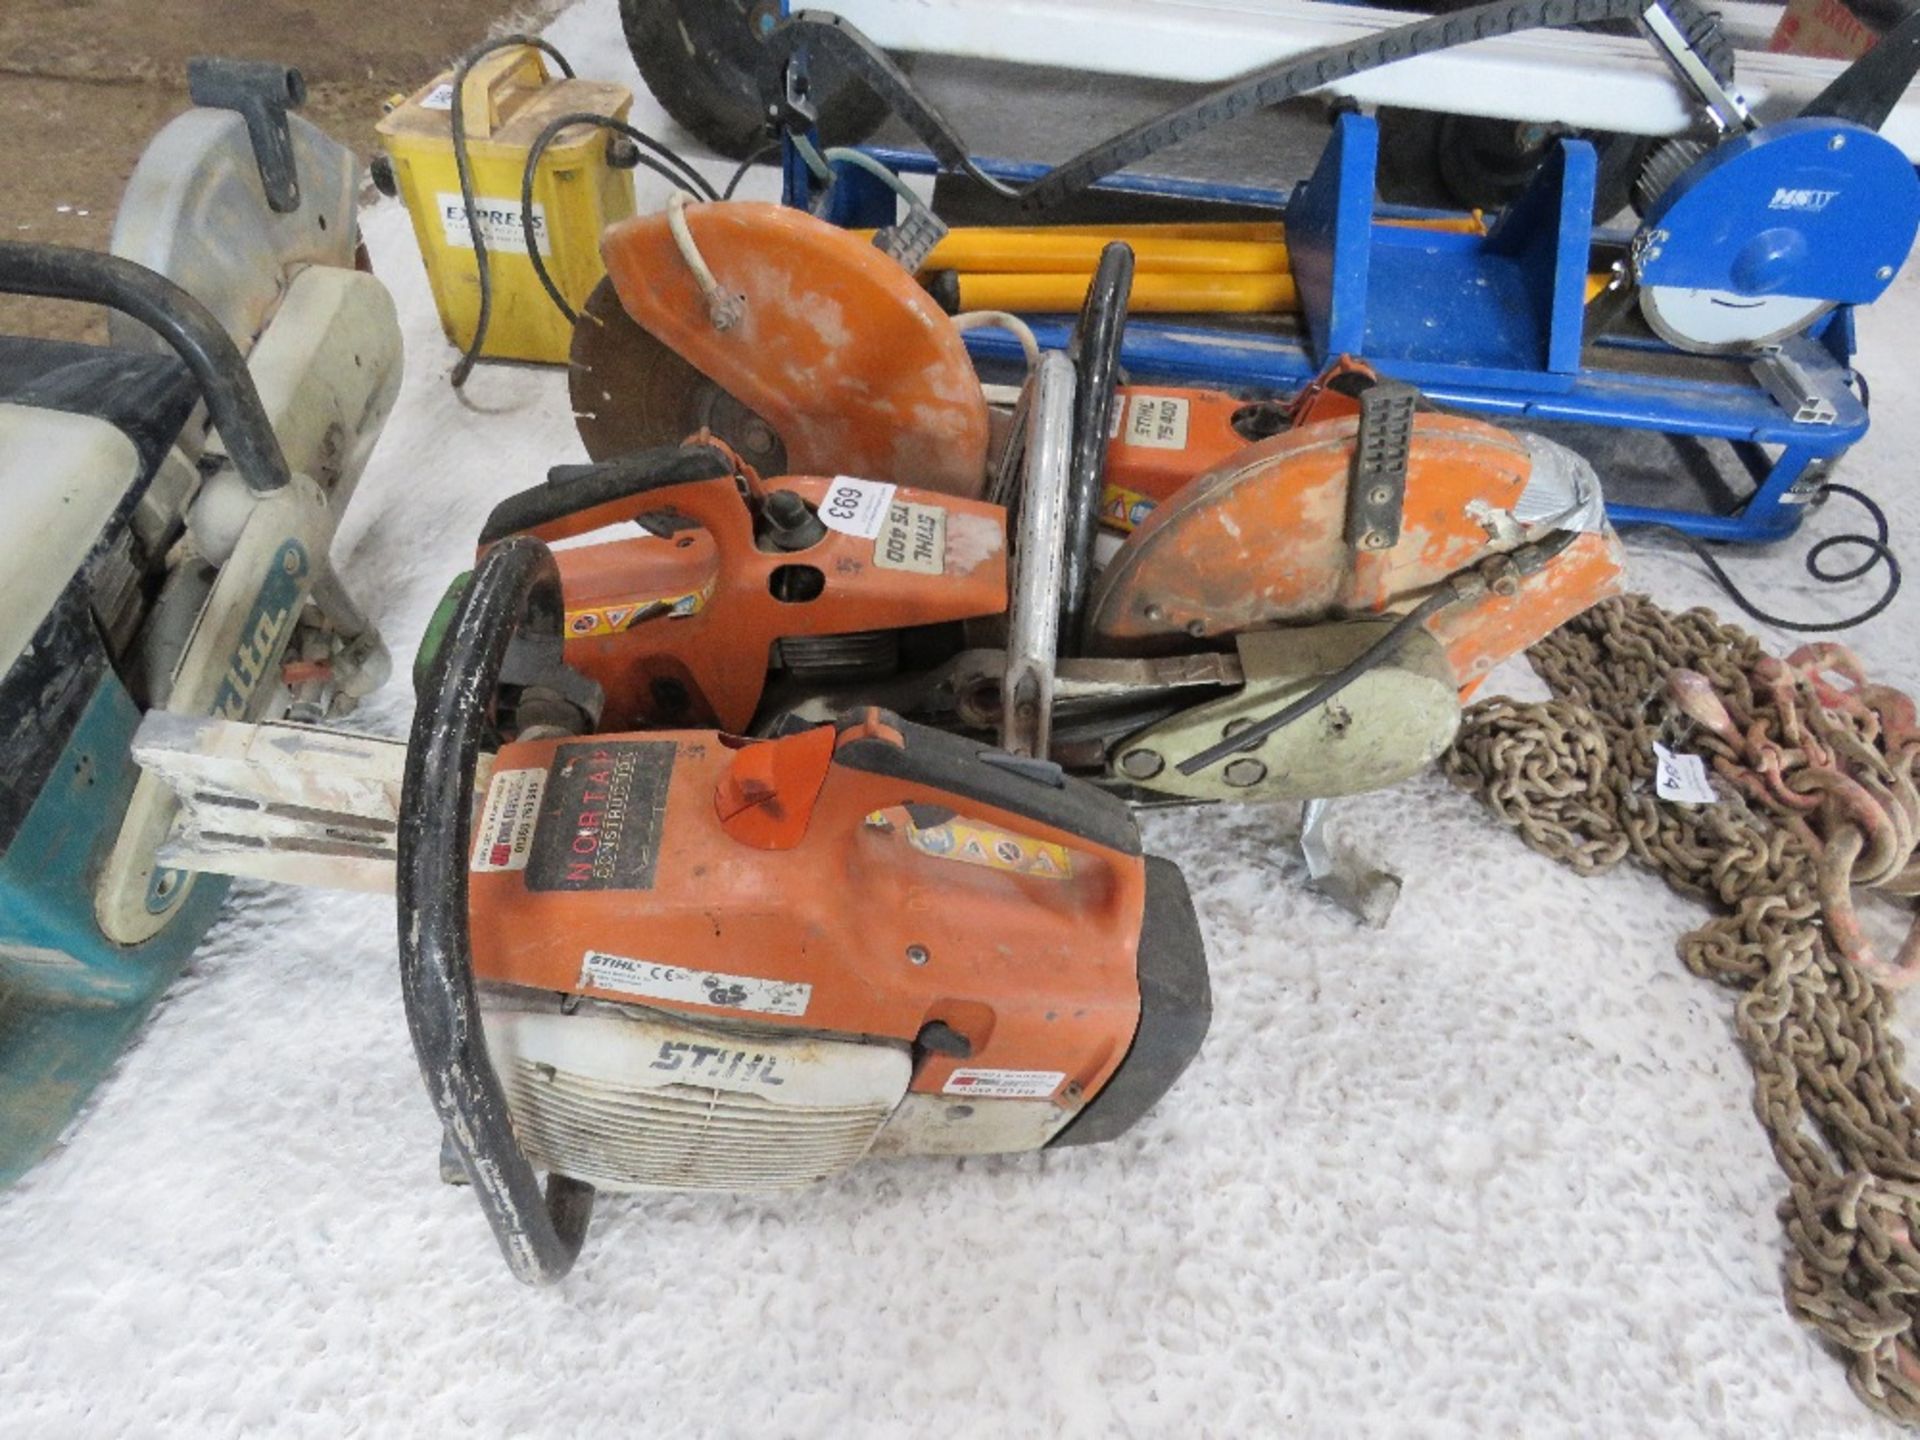 3 X STIHL TS400 PETROL SAWS FOR SPARES OR REPAIR.....THIS LOT IS SOLD UNDER THE AUCTIONEERS MARGIN S - Image 2 of 6